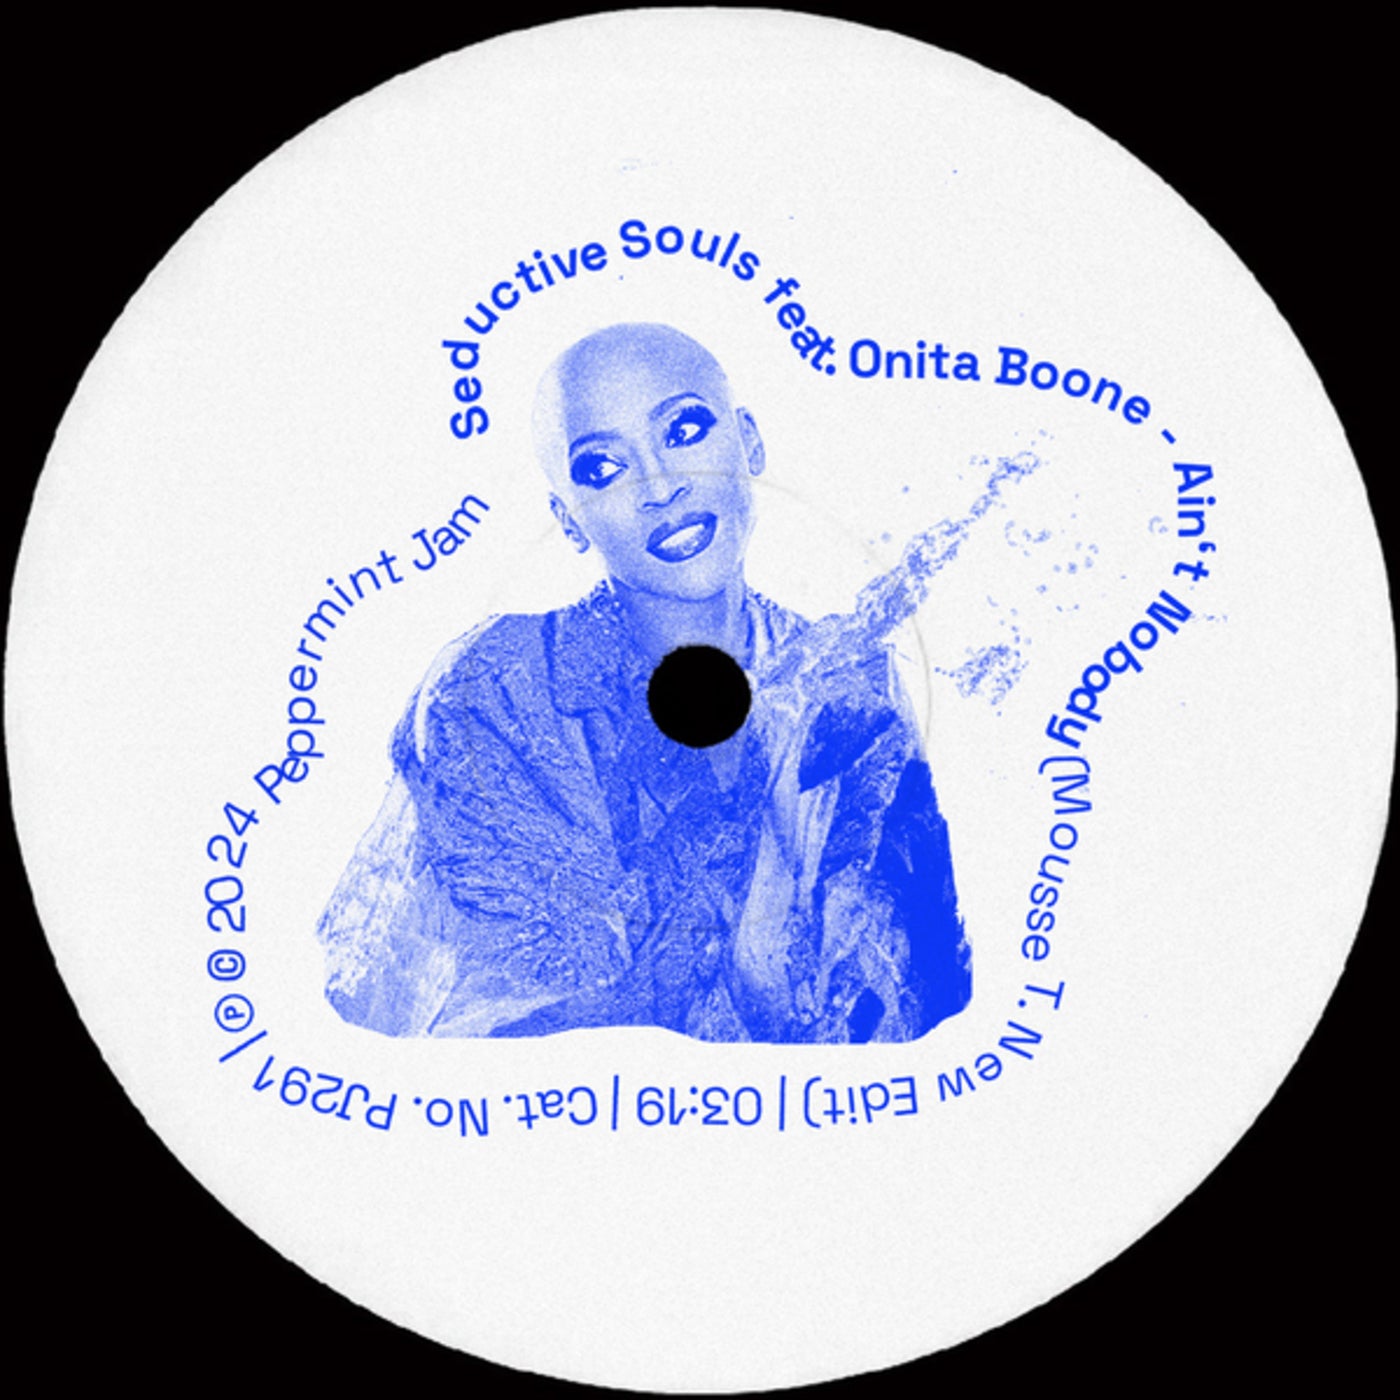 image cover: Seductive Souls, Mousse T., Onita Boone - Ain't Nobody (Mousse T. New Edit) on Peppermint Jam Records